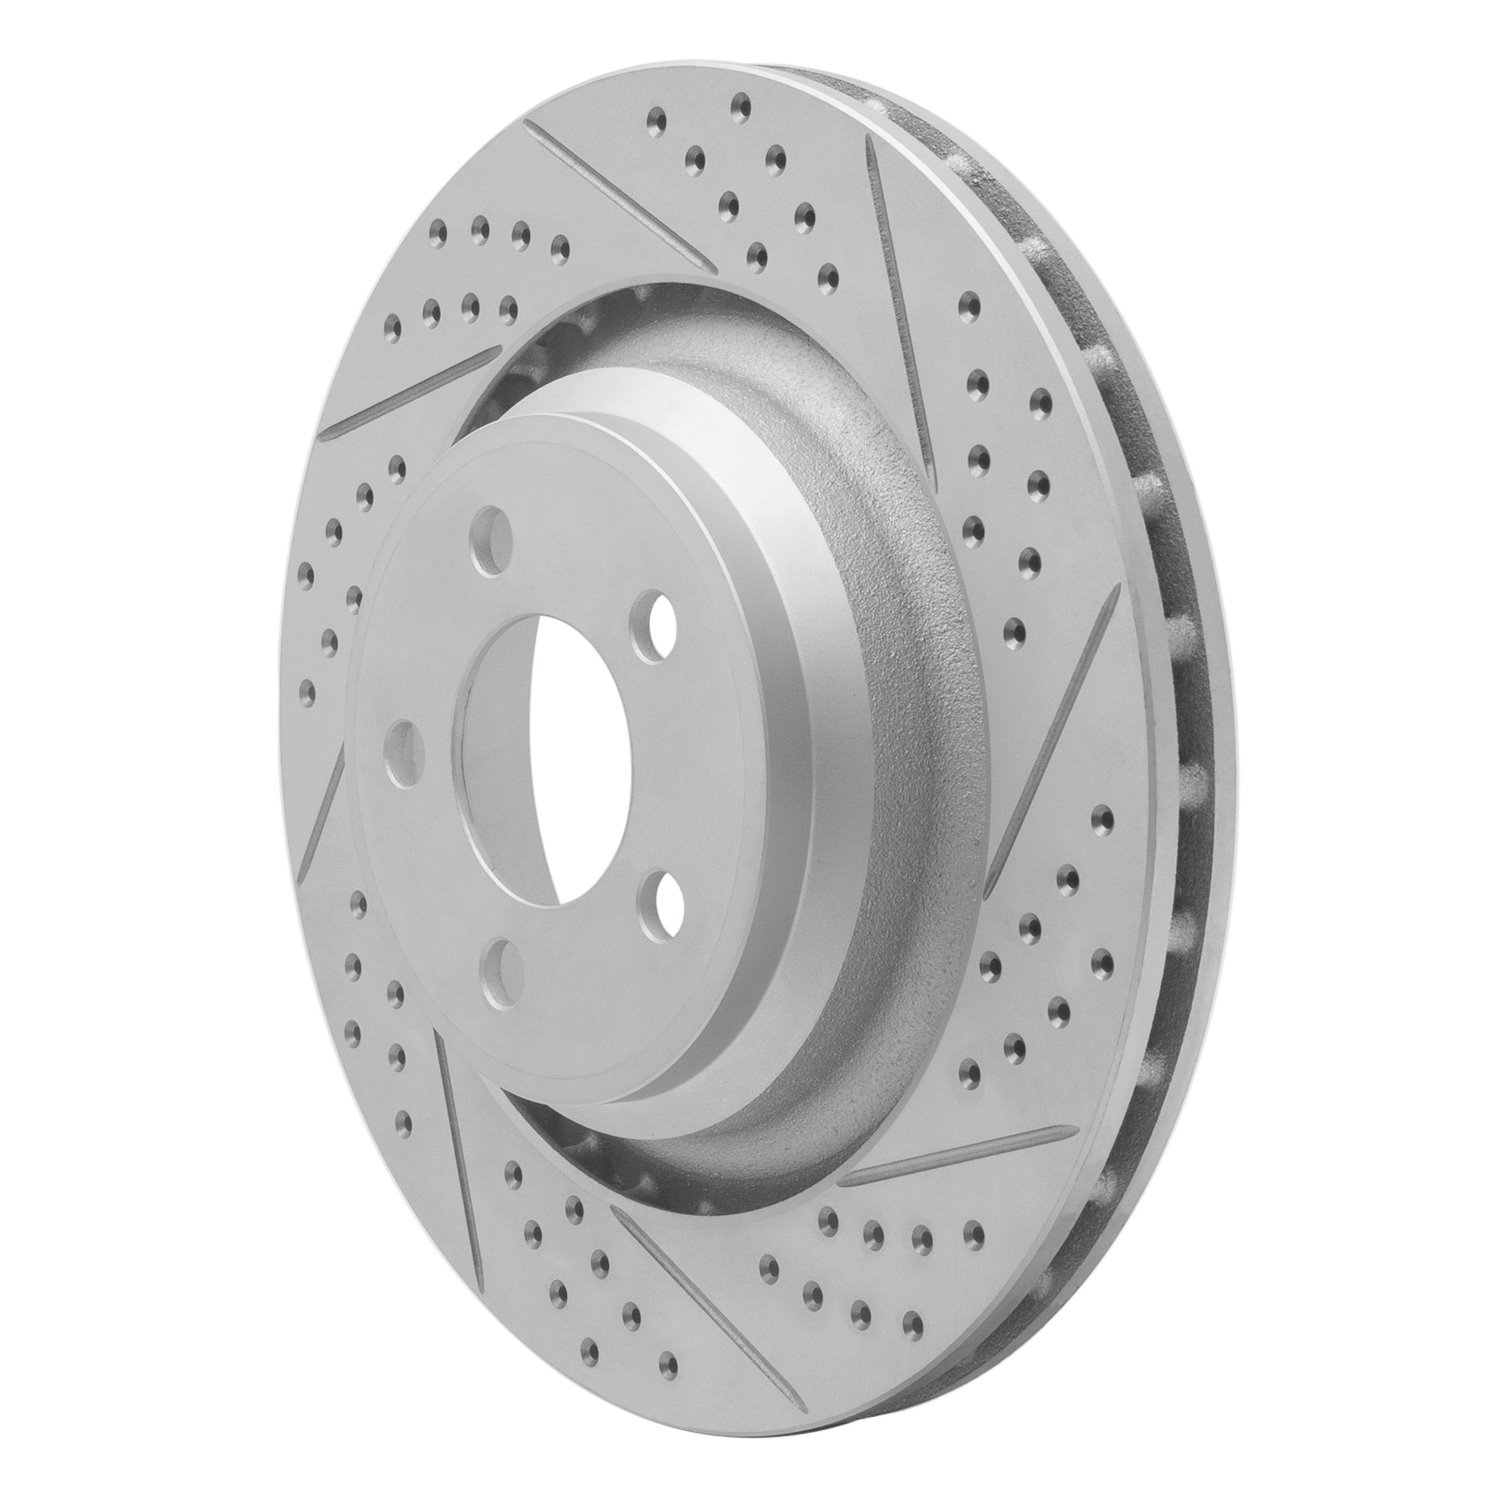 830-39020R Geoperformance Drilled/Slotted Brake Rotor, Fits Select Mopar, Position: Rear Right